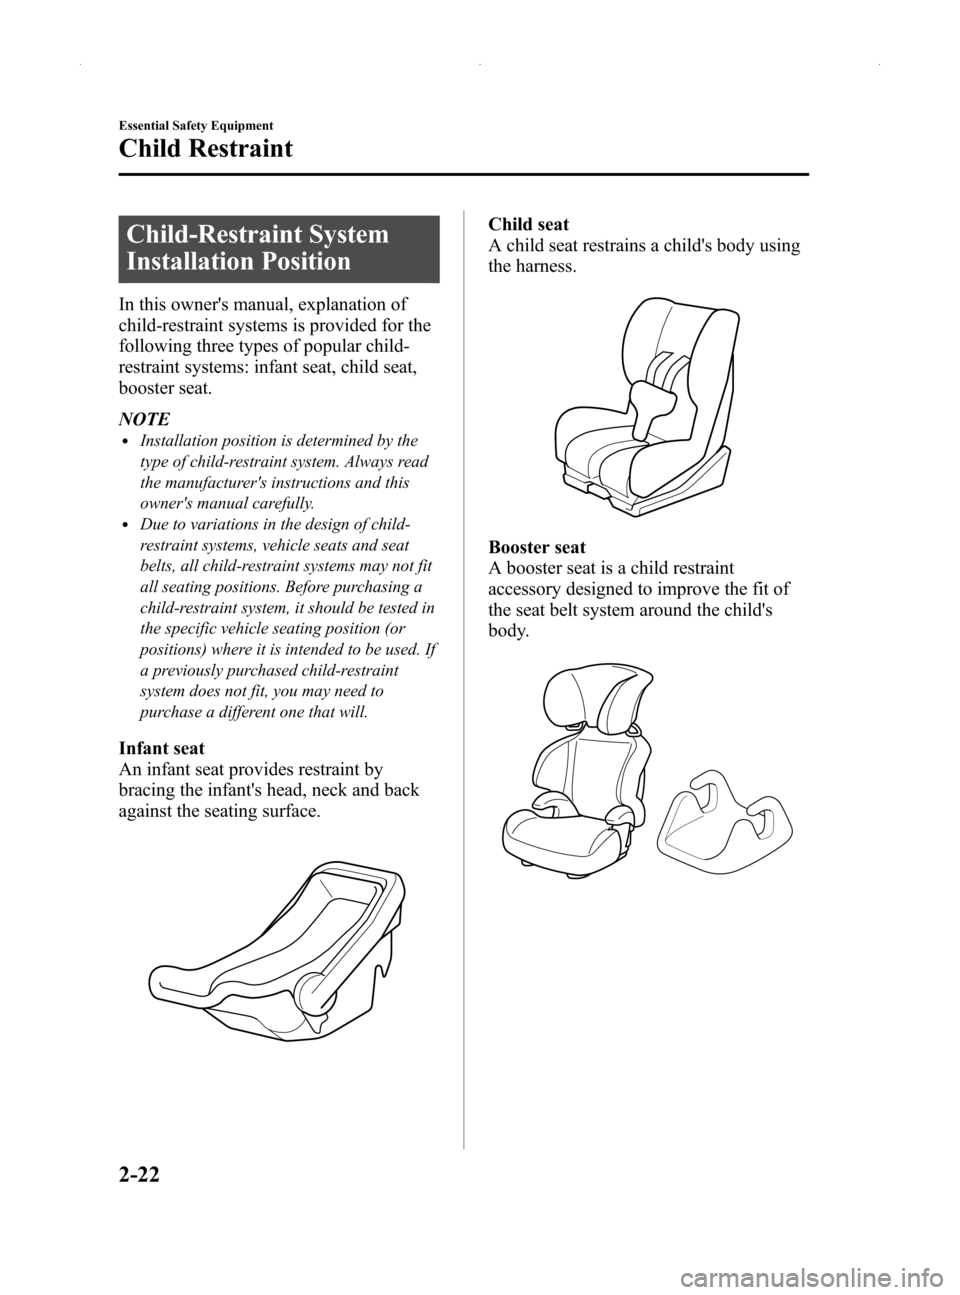 MAZDA MODEL MX-5 2014  Owners Manual (in English) Black plate (34,1)
Child-Restraint System
Installation Position
In this owners manual, explanation of
child-restraint systems is provided for the
following three types of popular child-
restraint sys